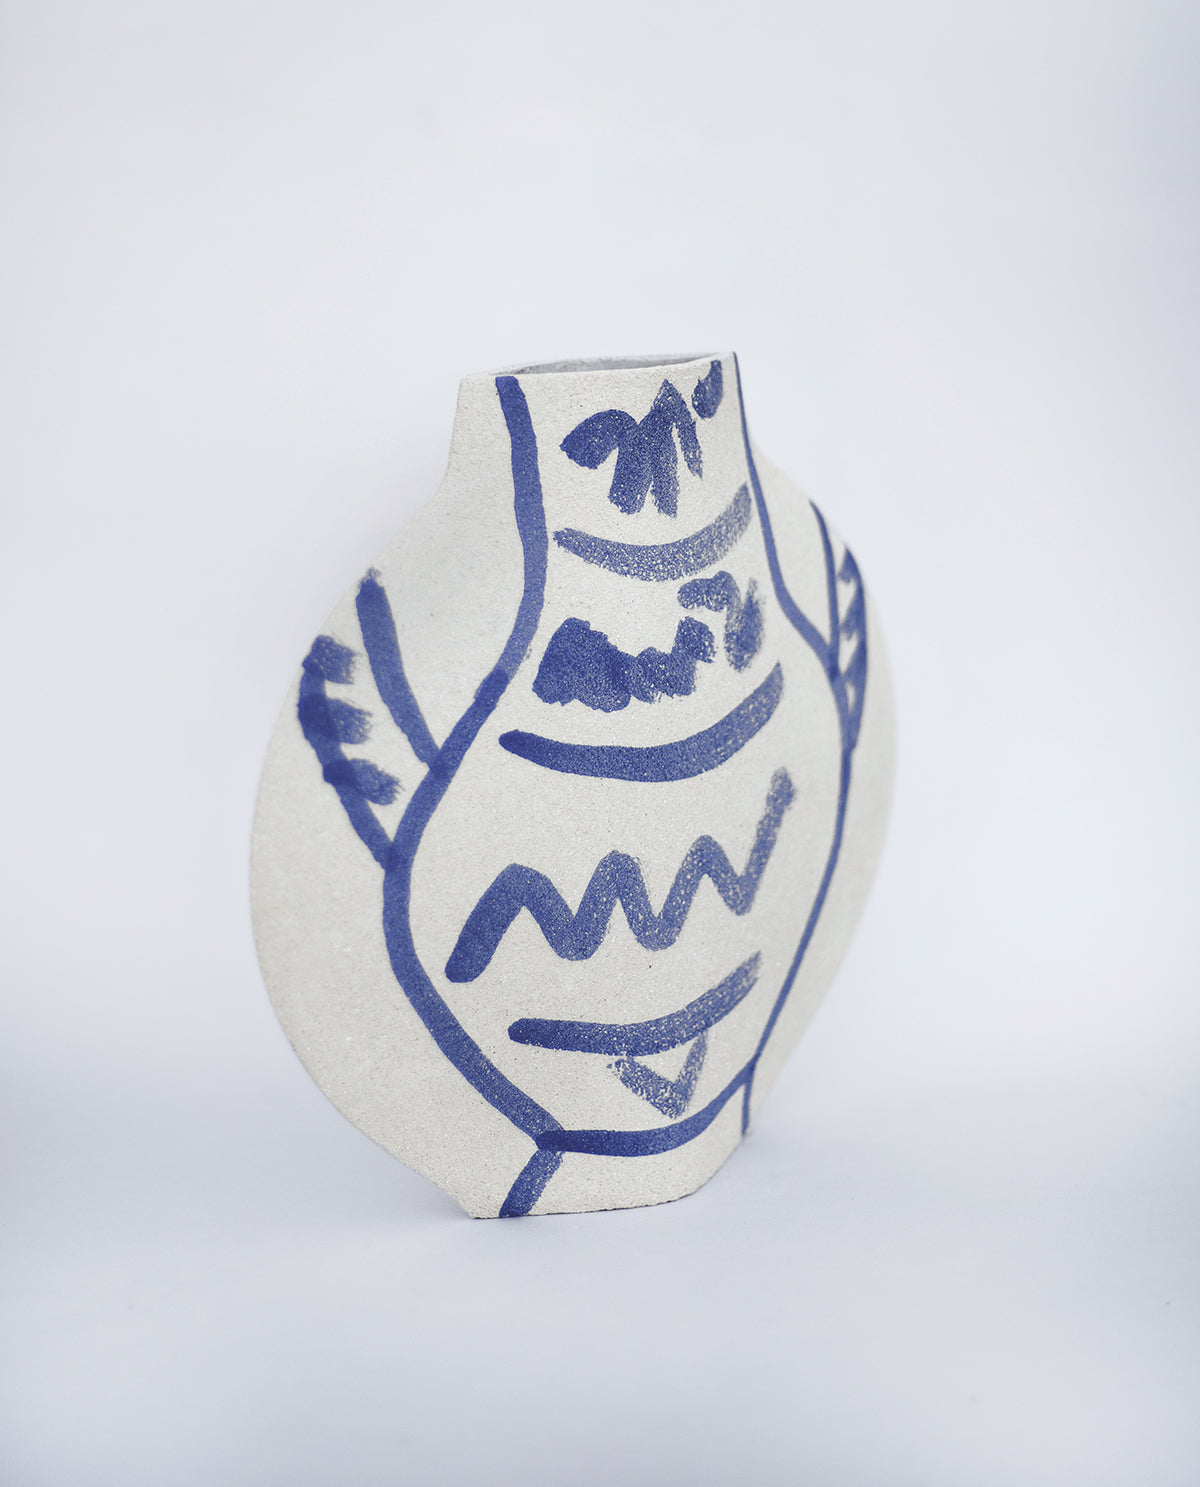 Hand-painted trompe l'oeil vase by INI CERAMIQUE with illustrative patterns and textured finish